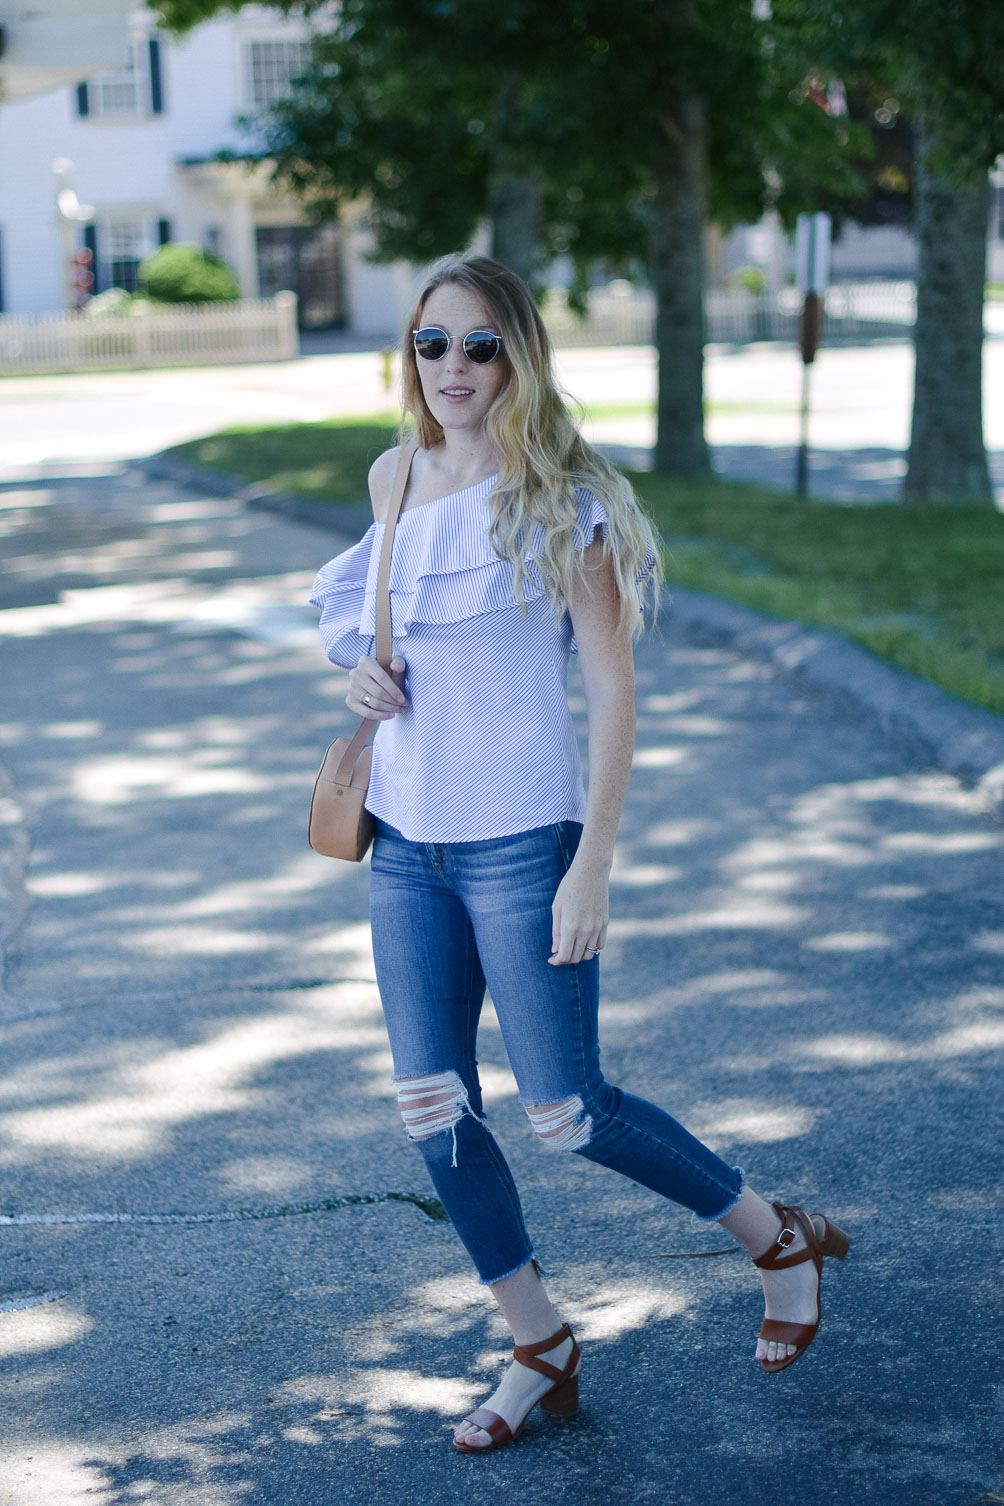 styling a summer outfit with this one shoulder ruffle top and distressed skinny jeans